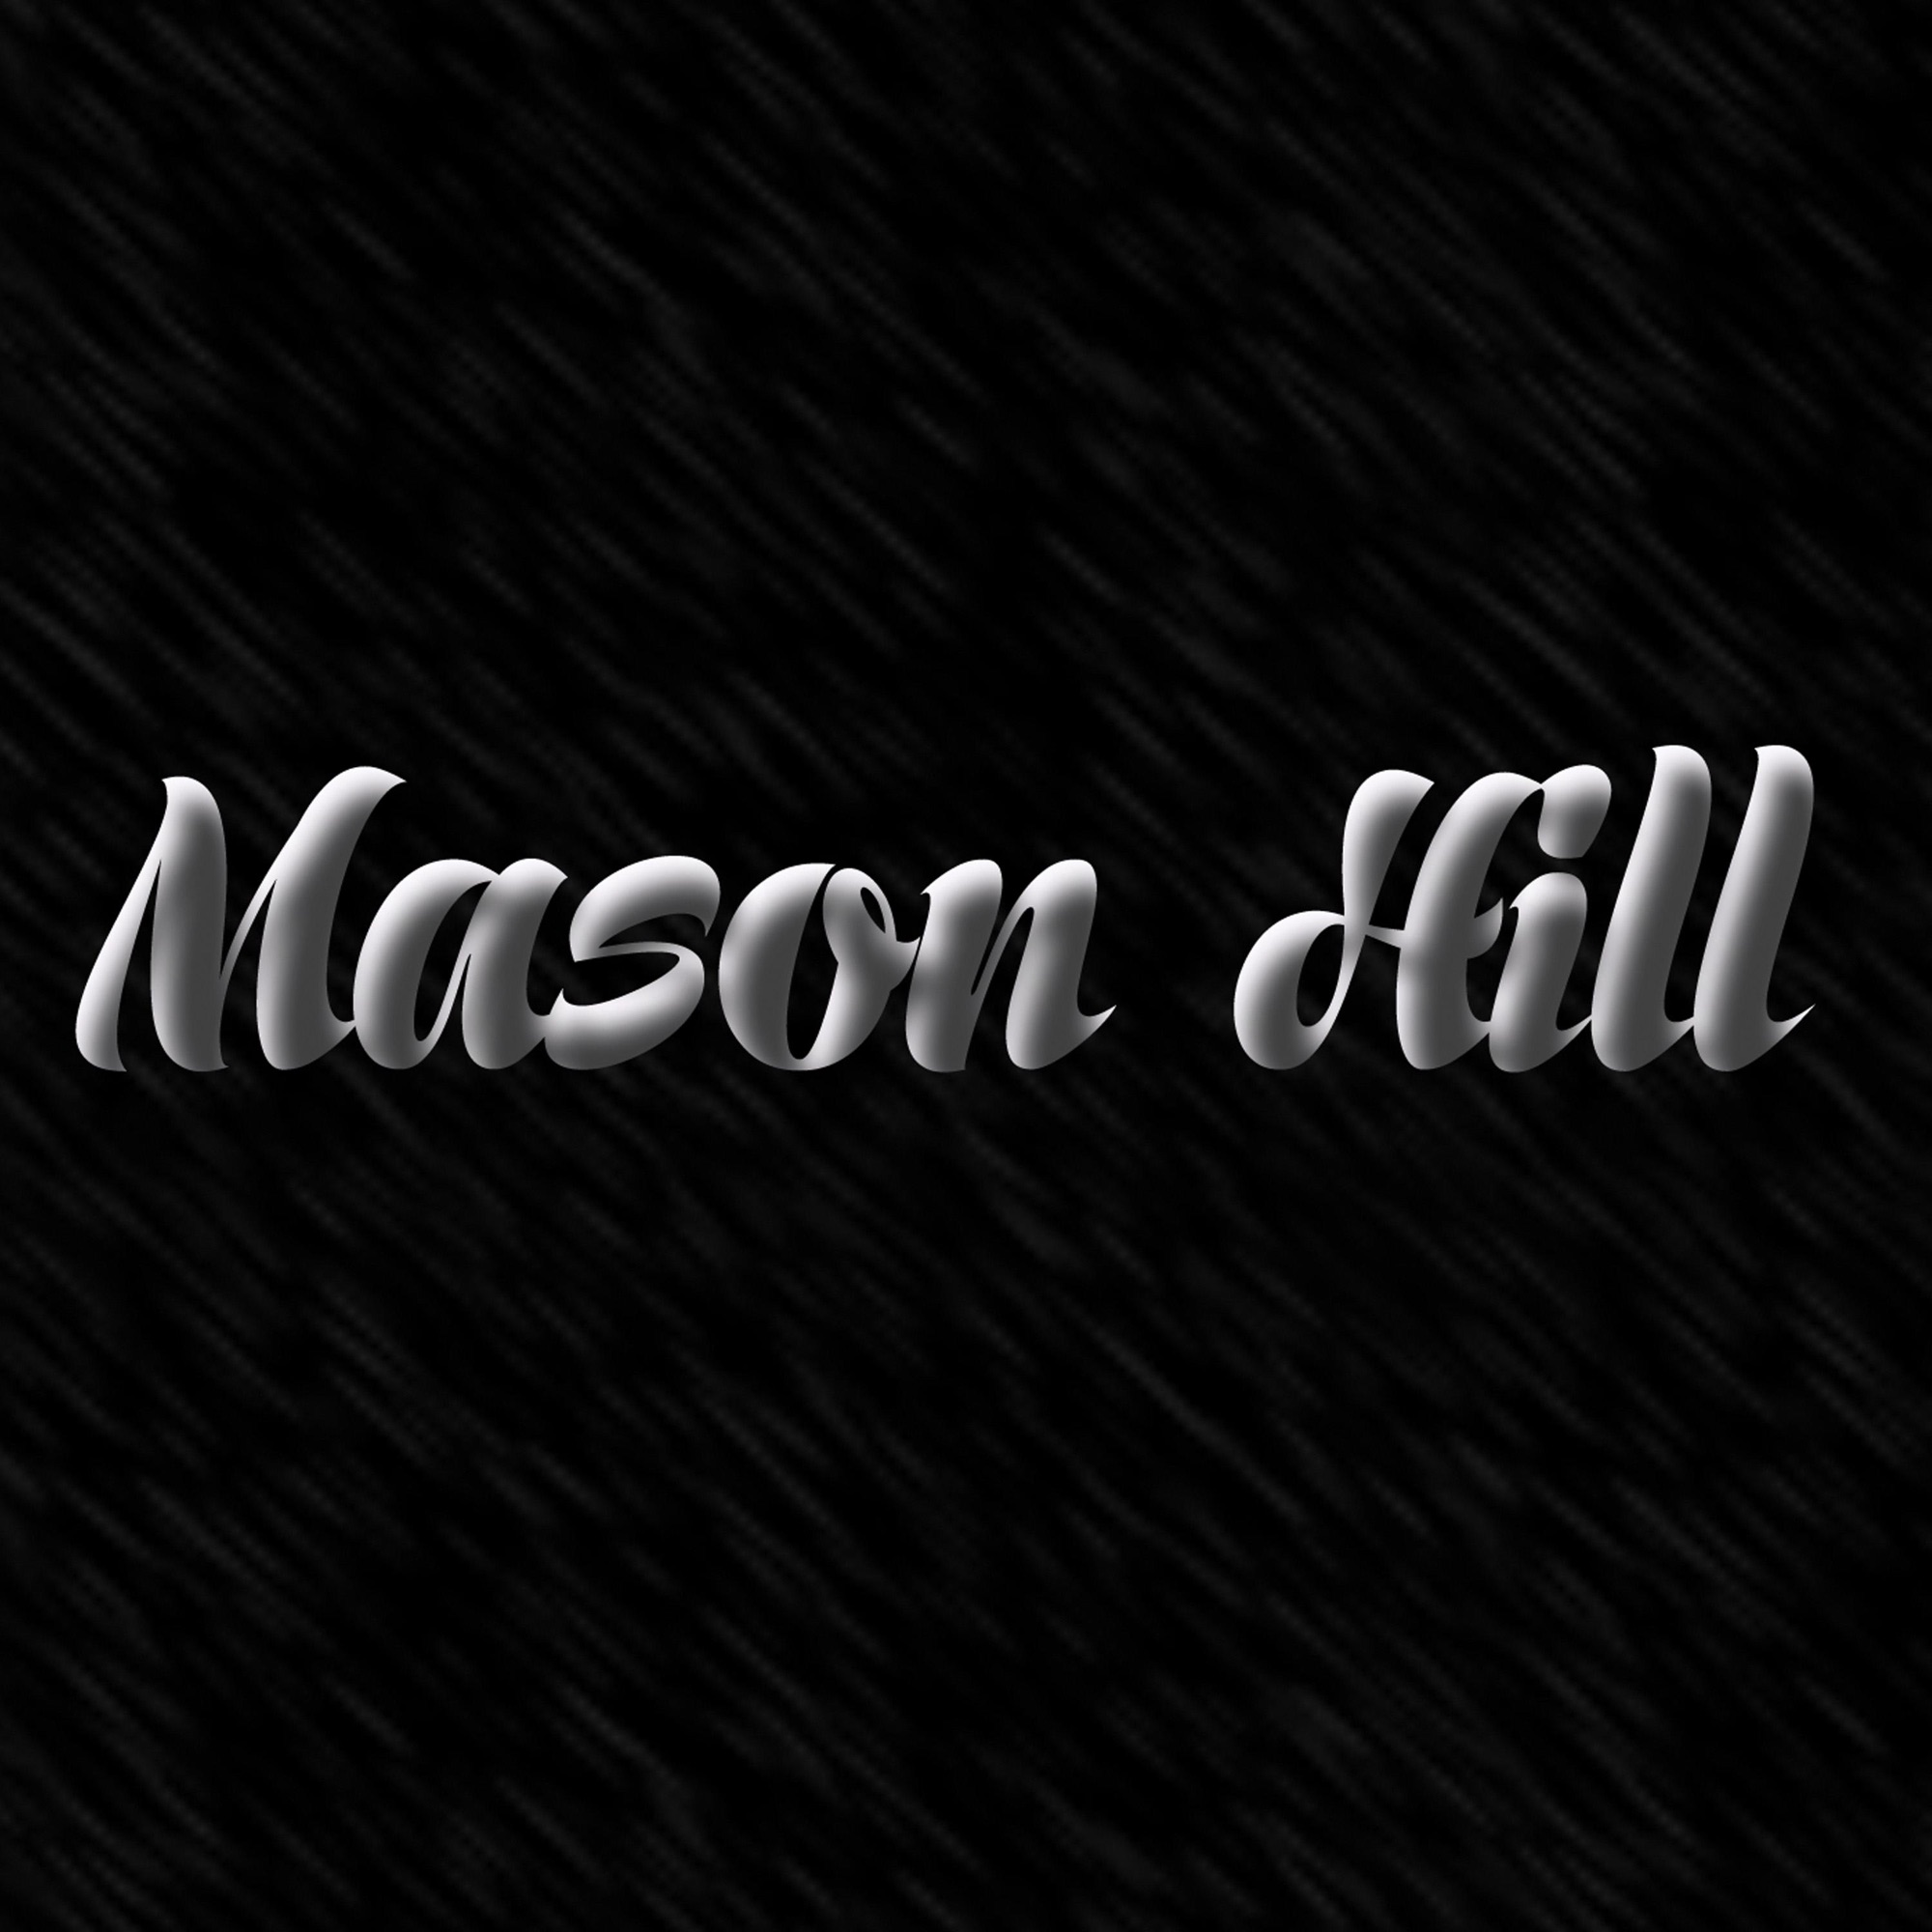 Art for Now You See Me by Mason Hill